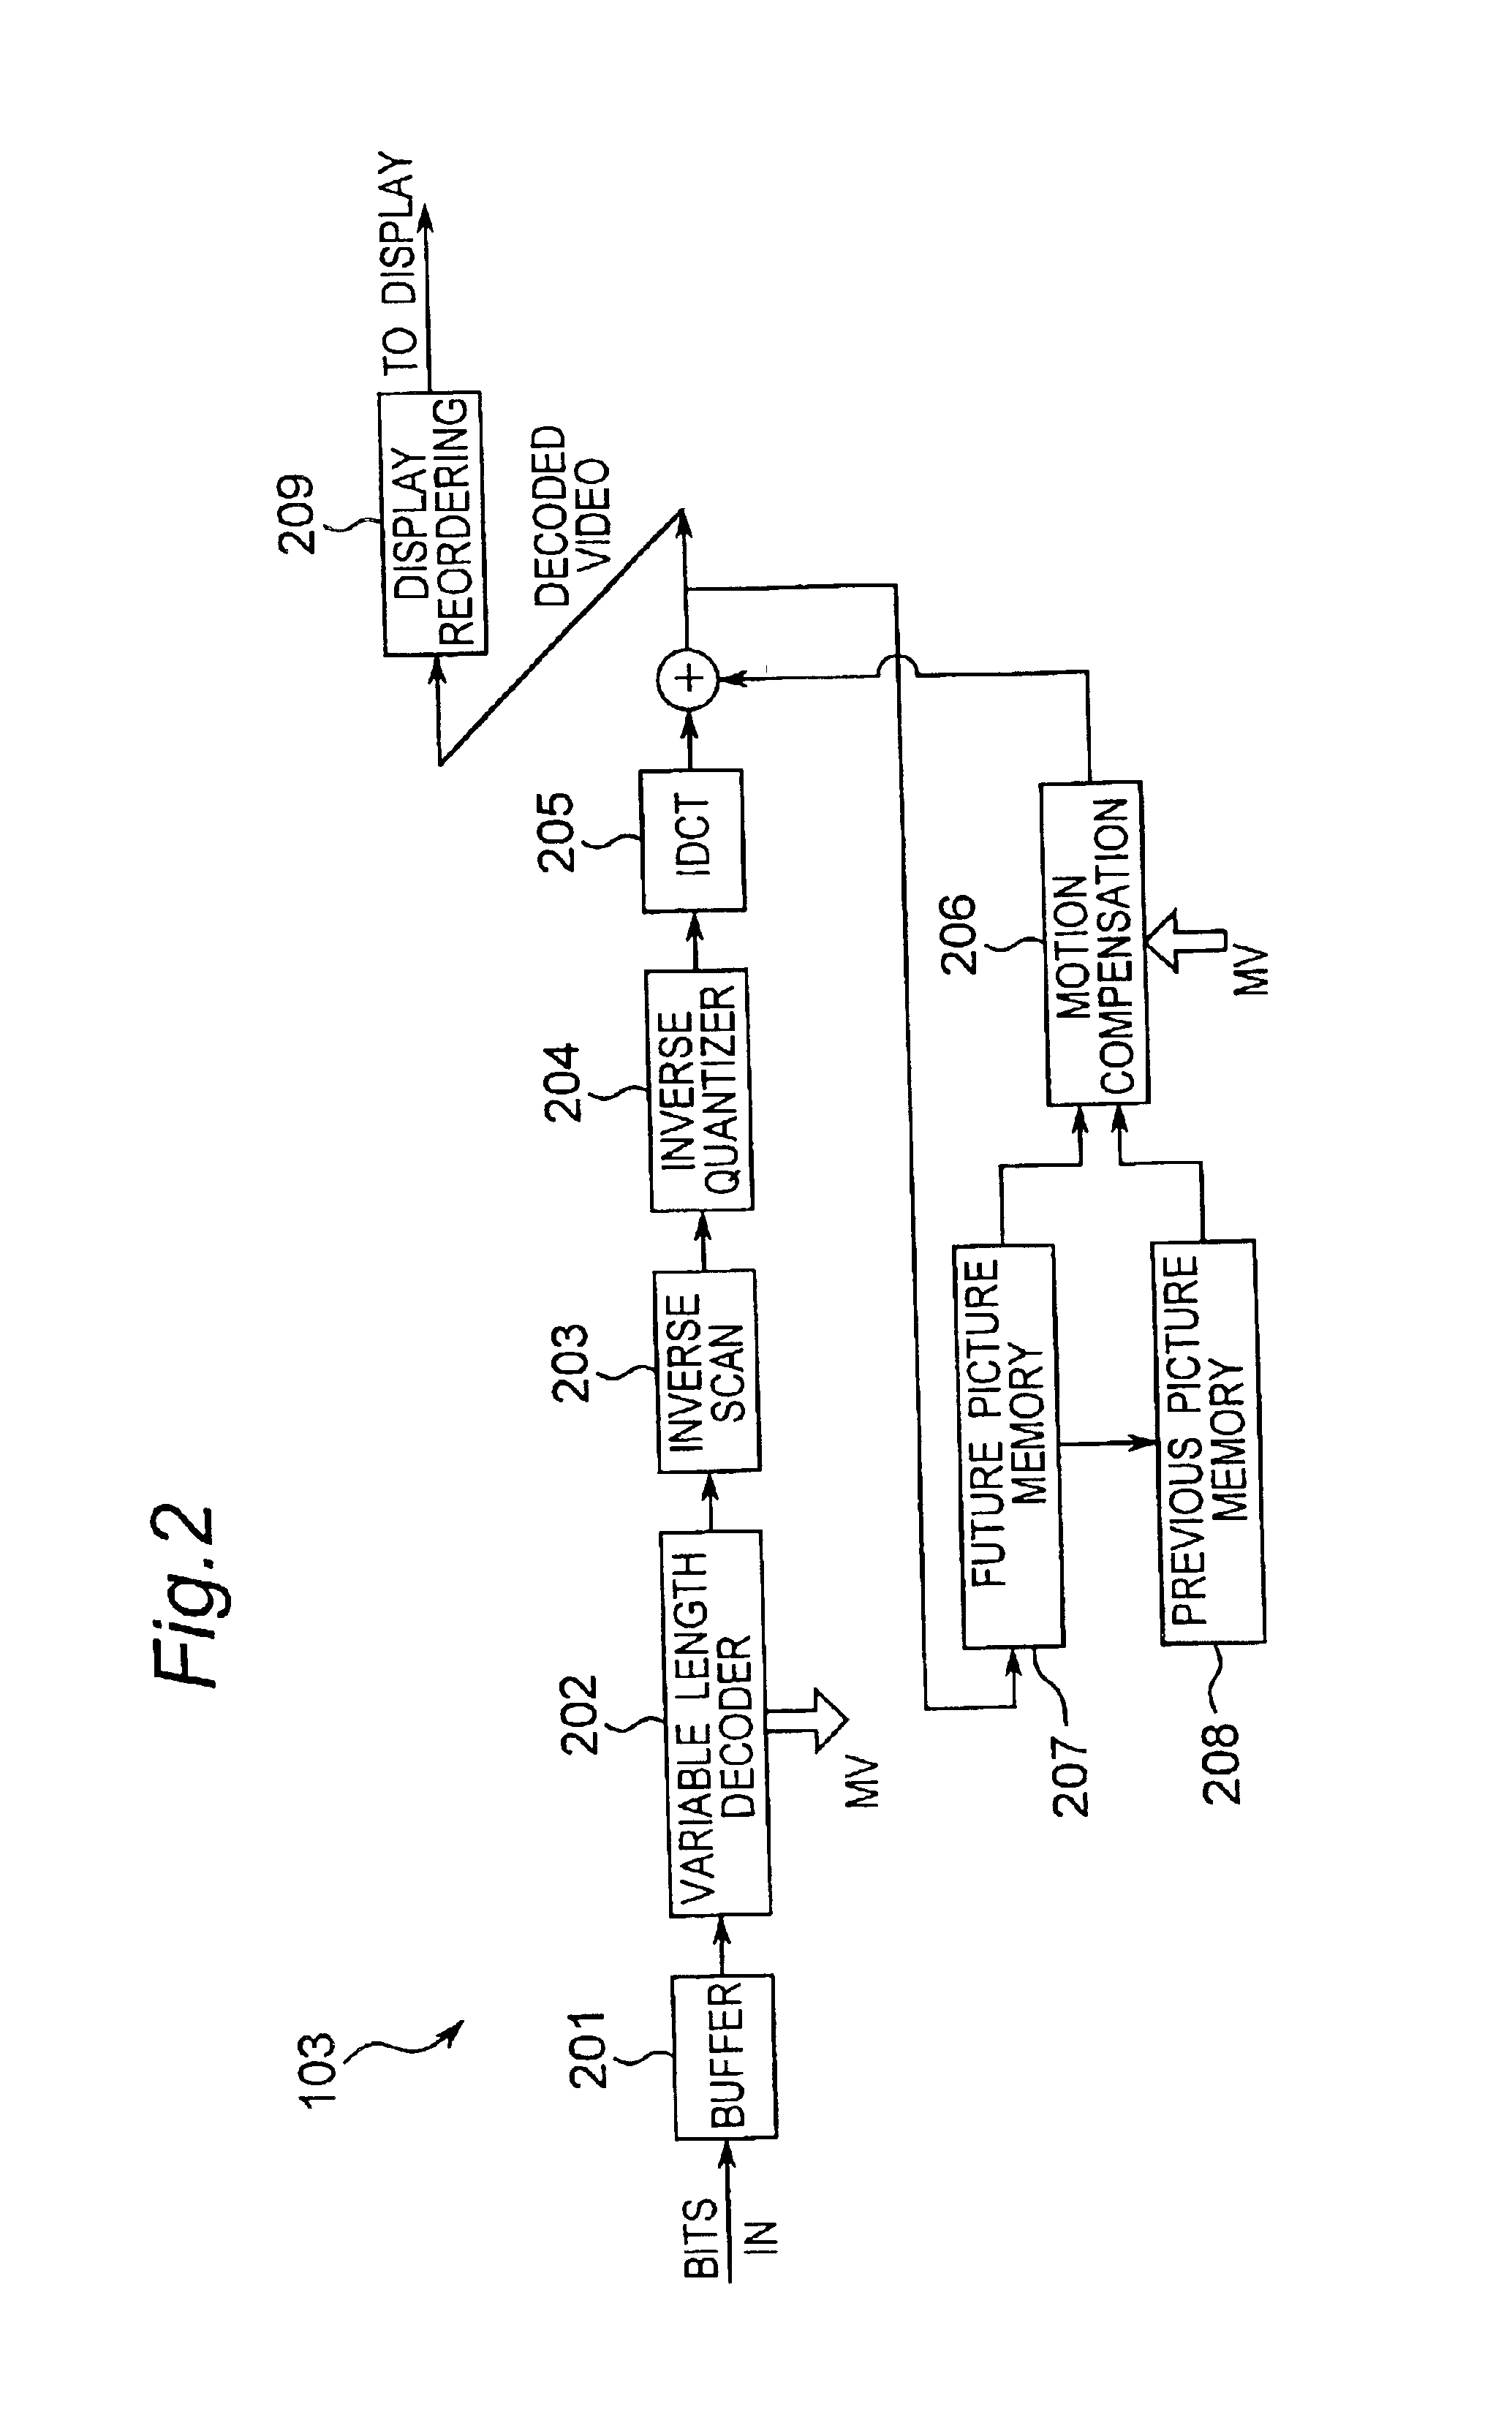 Method of MPEG-2 video variable length decoding in software